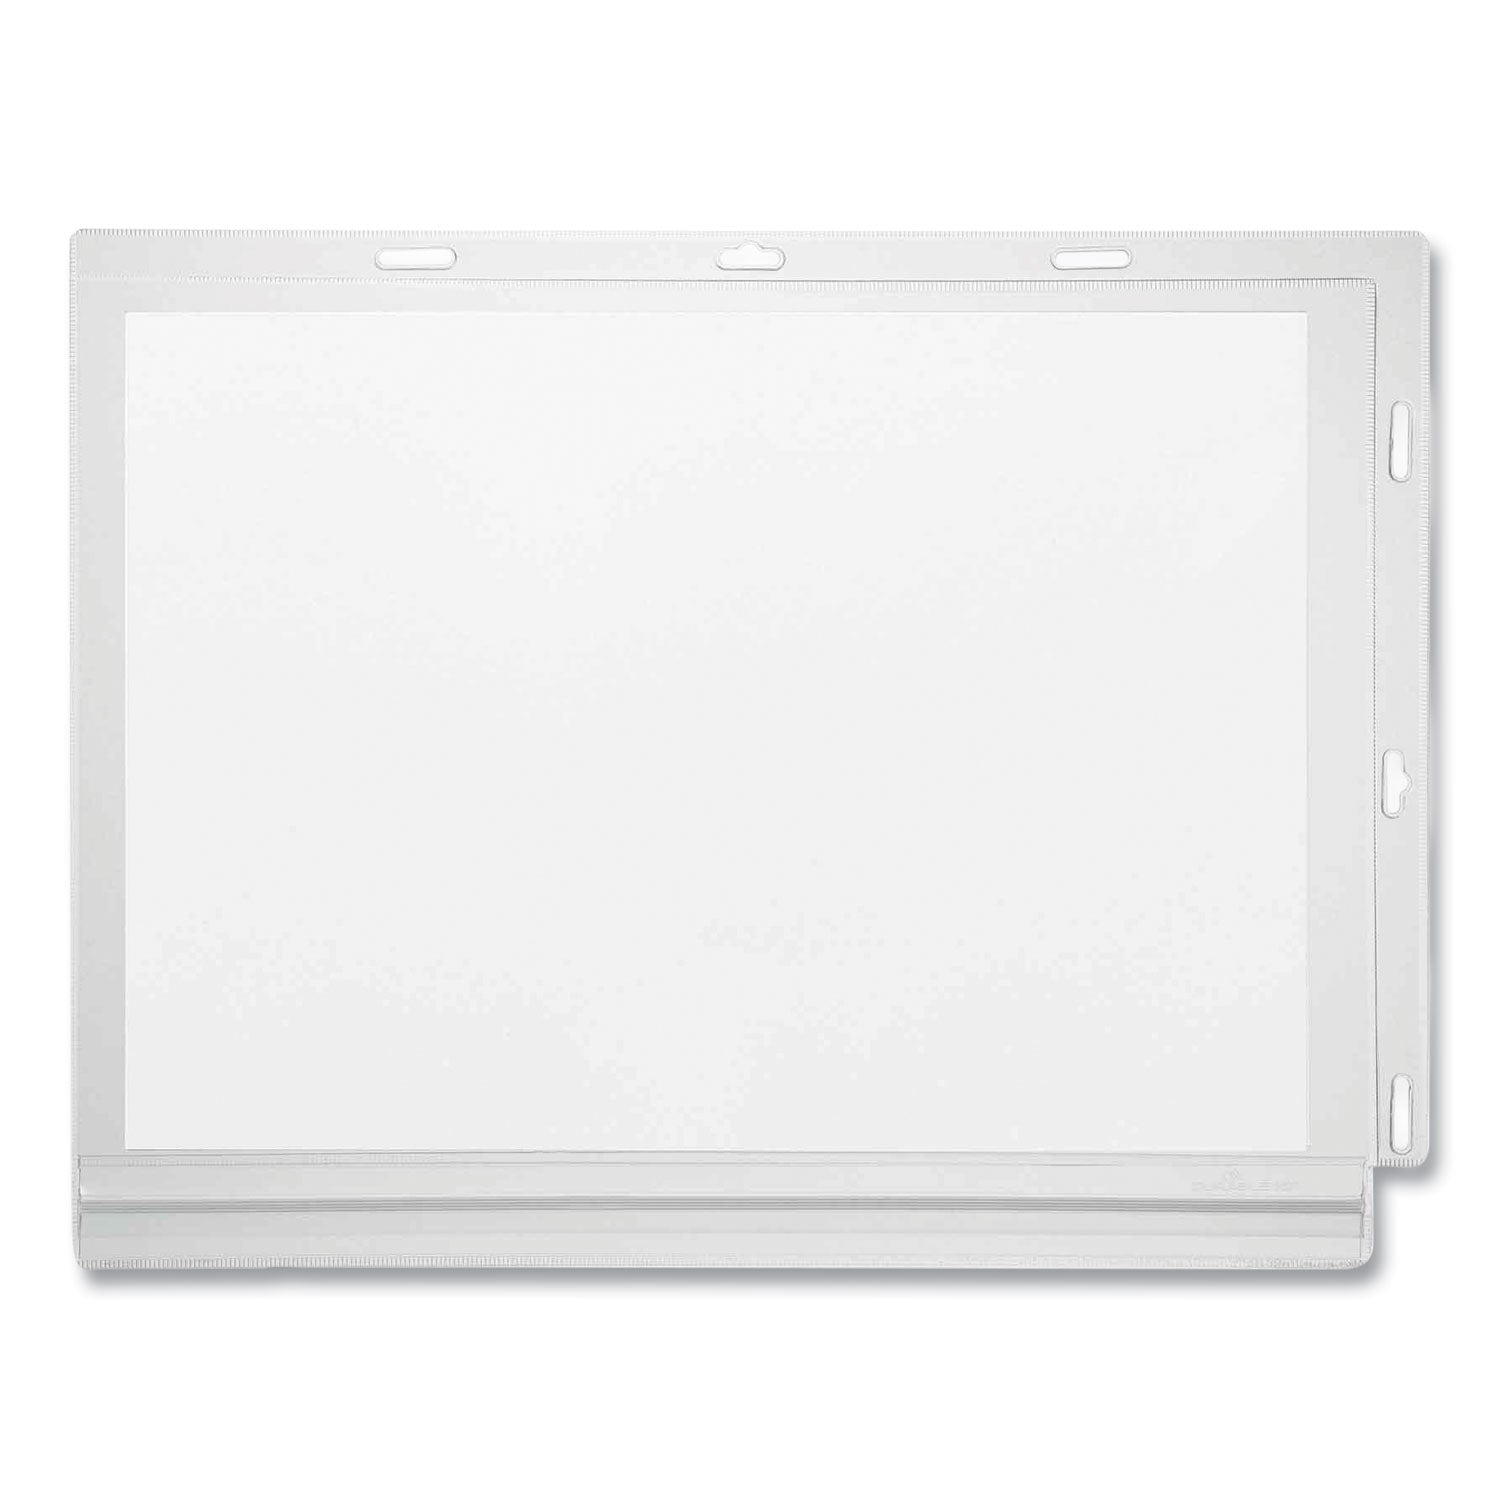 water-resistant-sign-holder-pockets-with-cable-ties-85-x-11-clear-frame-5-pack_dbl502719 - 3